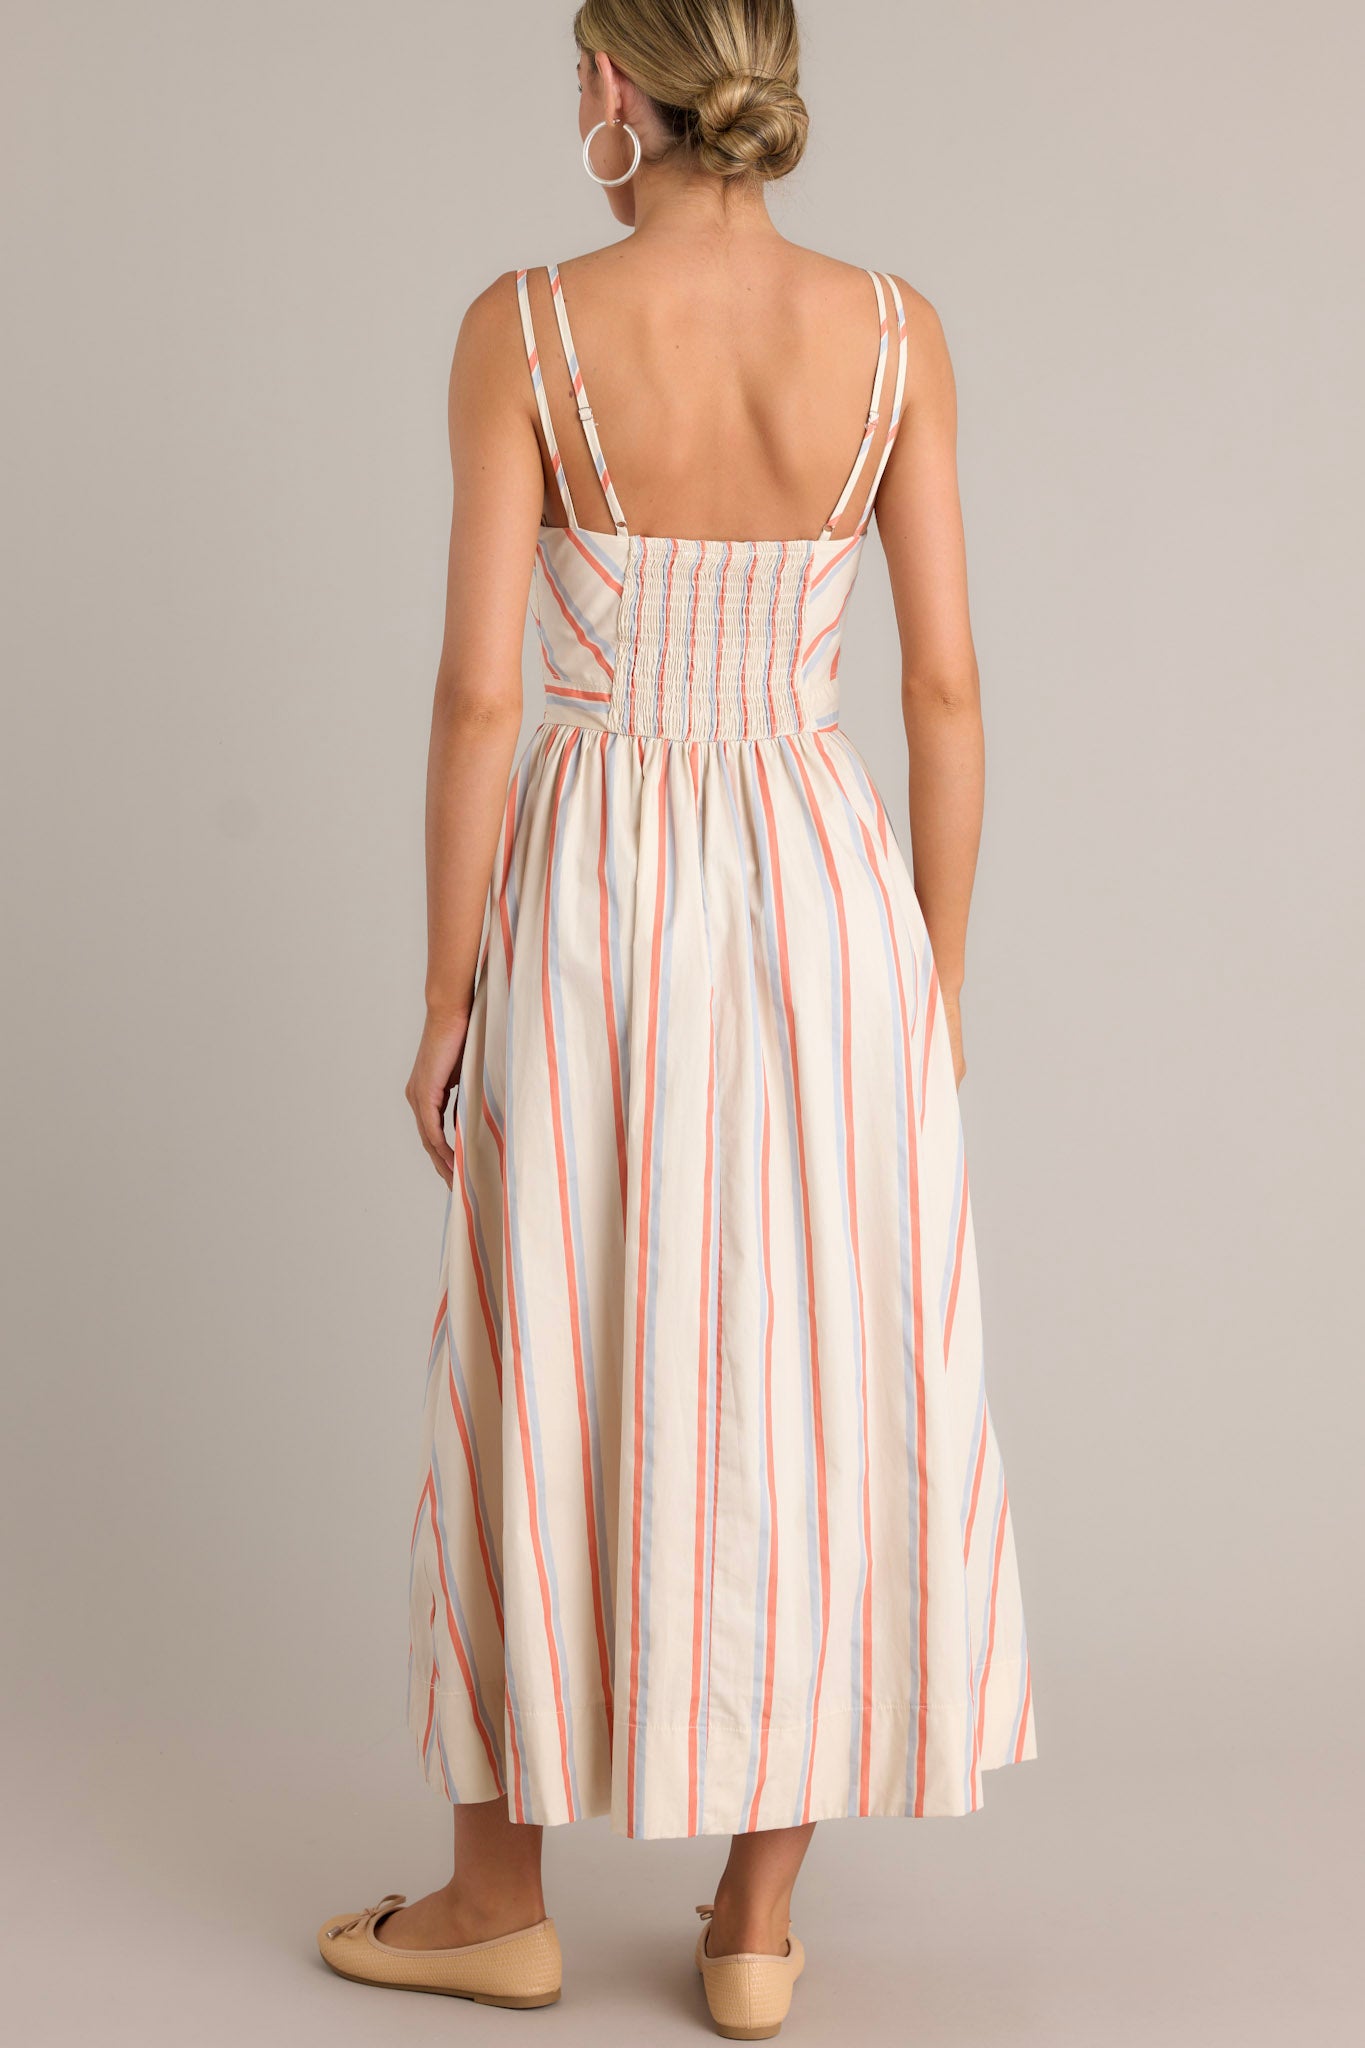 Back view of a multi stripe dress highlighting the smocked back insert, thin adjustable double straps, and overall fit.